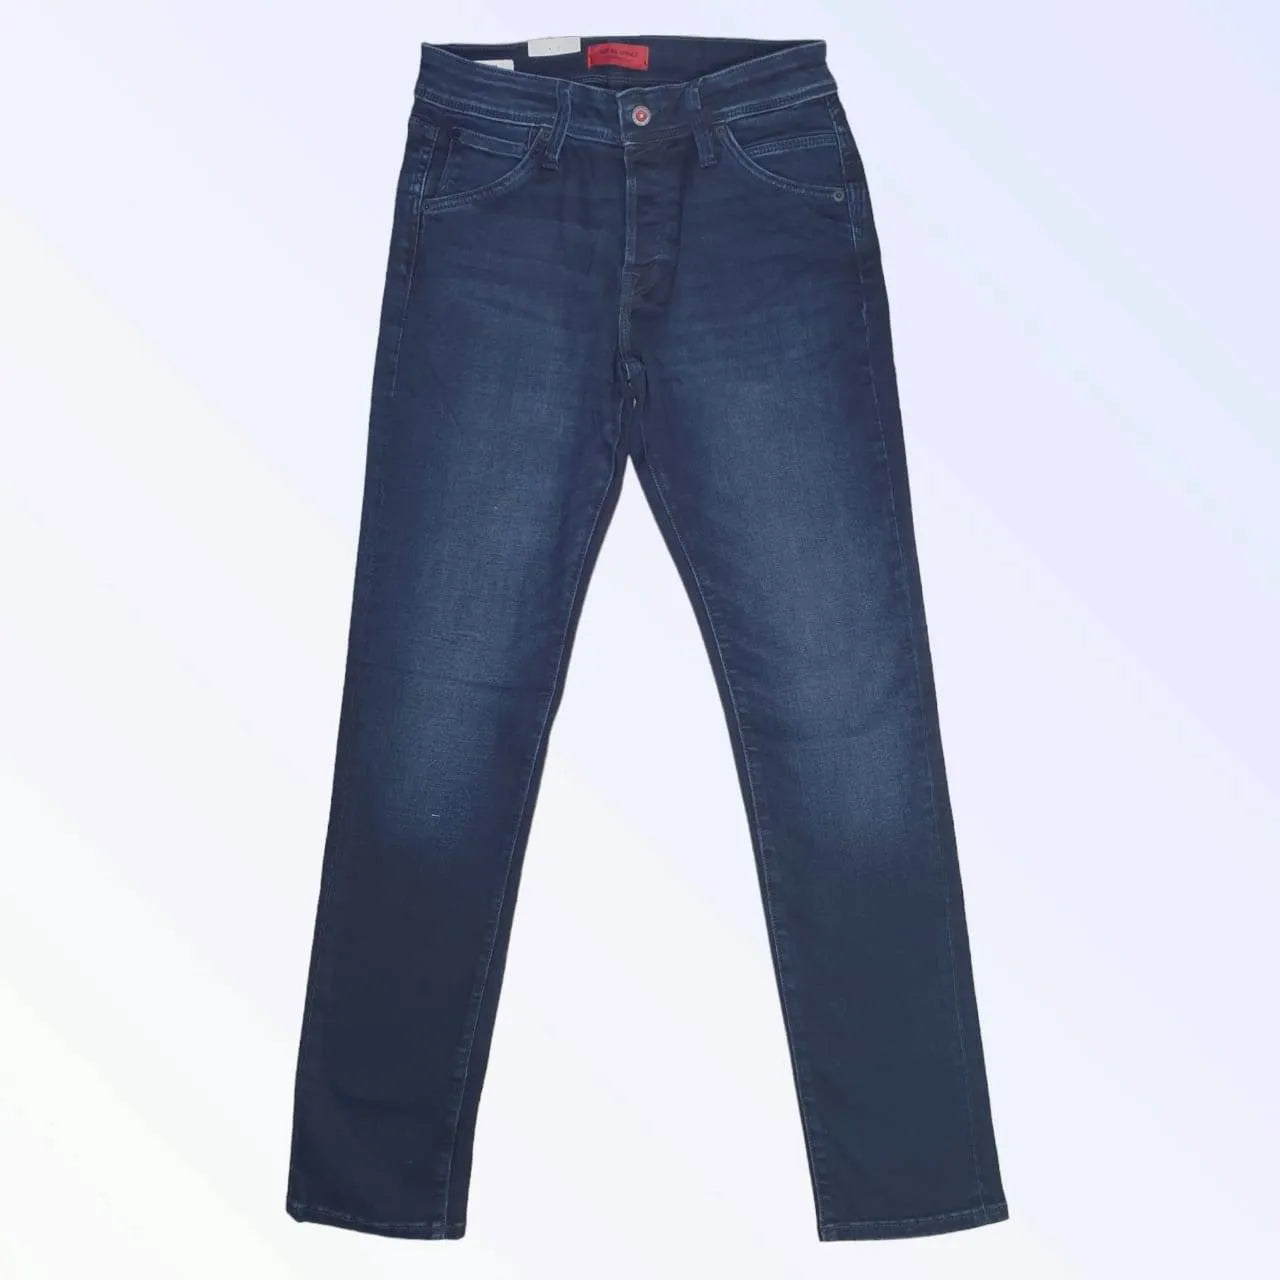 Jack&Jones Deep Blue Jeans: Slim/Glenn fit for a sharp & comfortable look (mention size if relevant). Designed to hug your legs comfortably for a defined silhouette.Jack&Jones, Slim/Glenn fit, comfortable, stylish, versatile, everyday essentials.